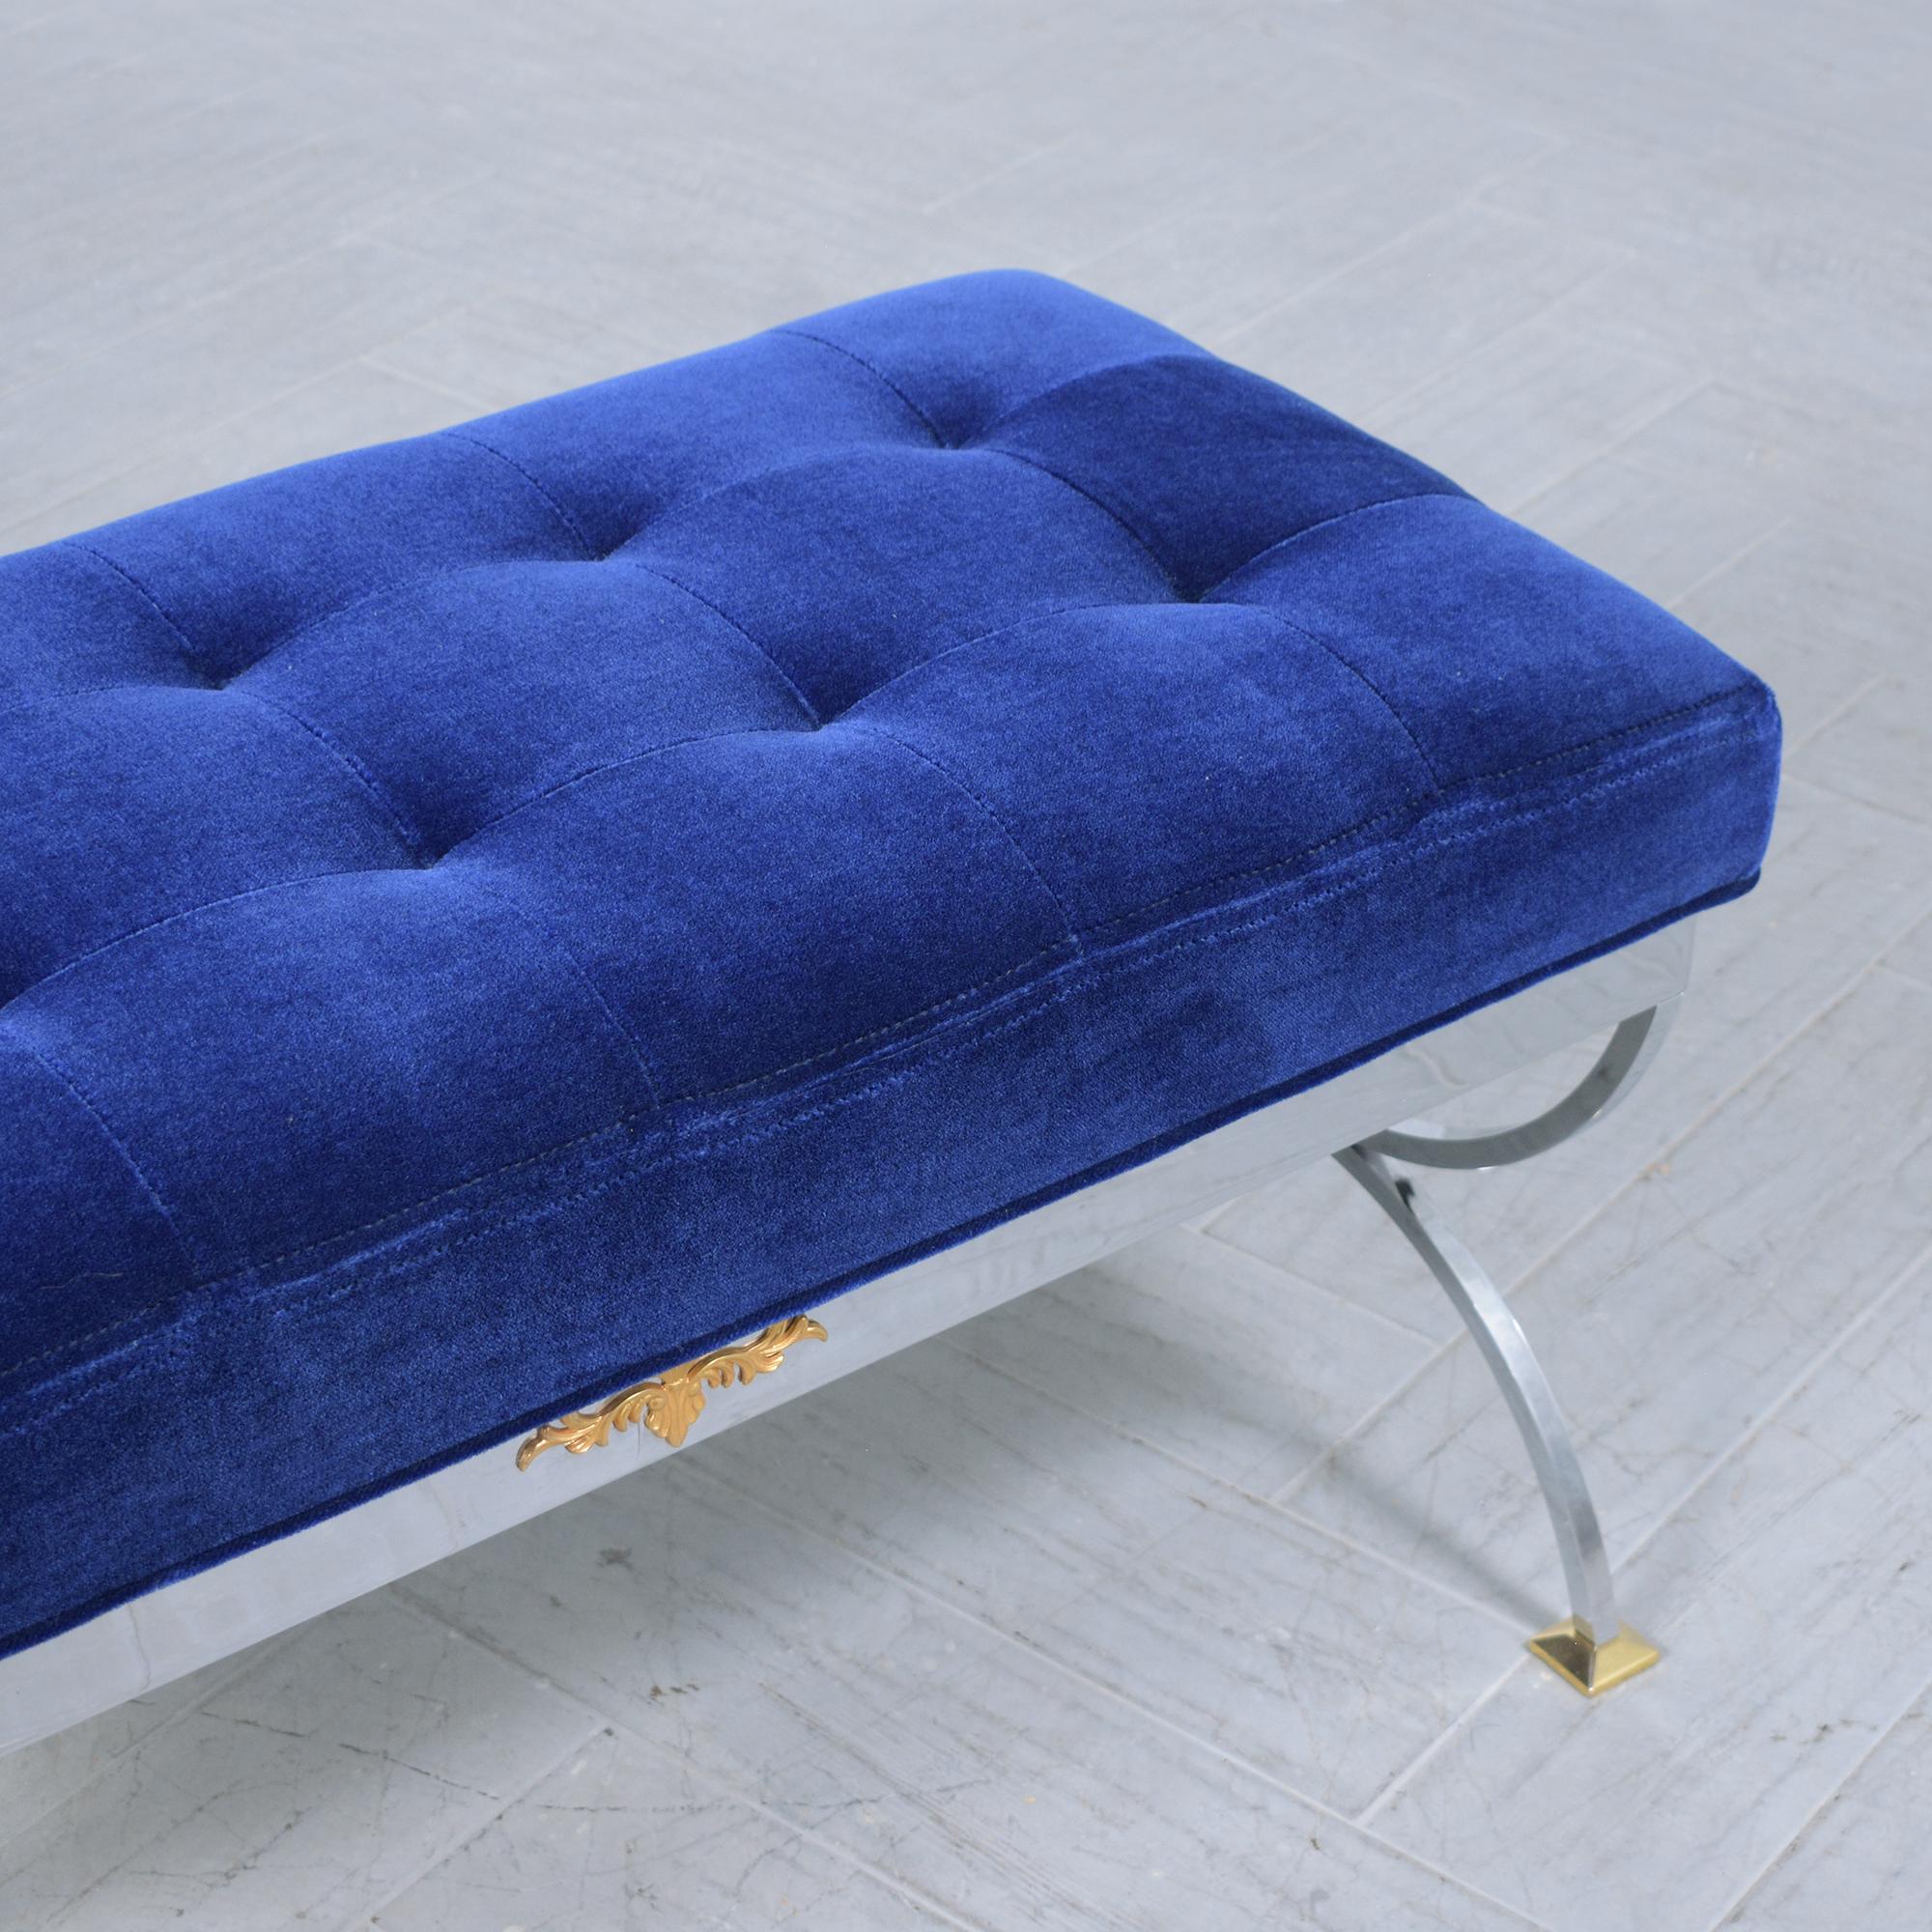 Restored 1960 Chrome Steel Mid-Century Modern Bench with Navy Blue Mohair Velvet In Good Condition For Sale In Los Angeles, CA